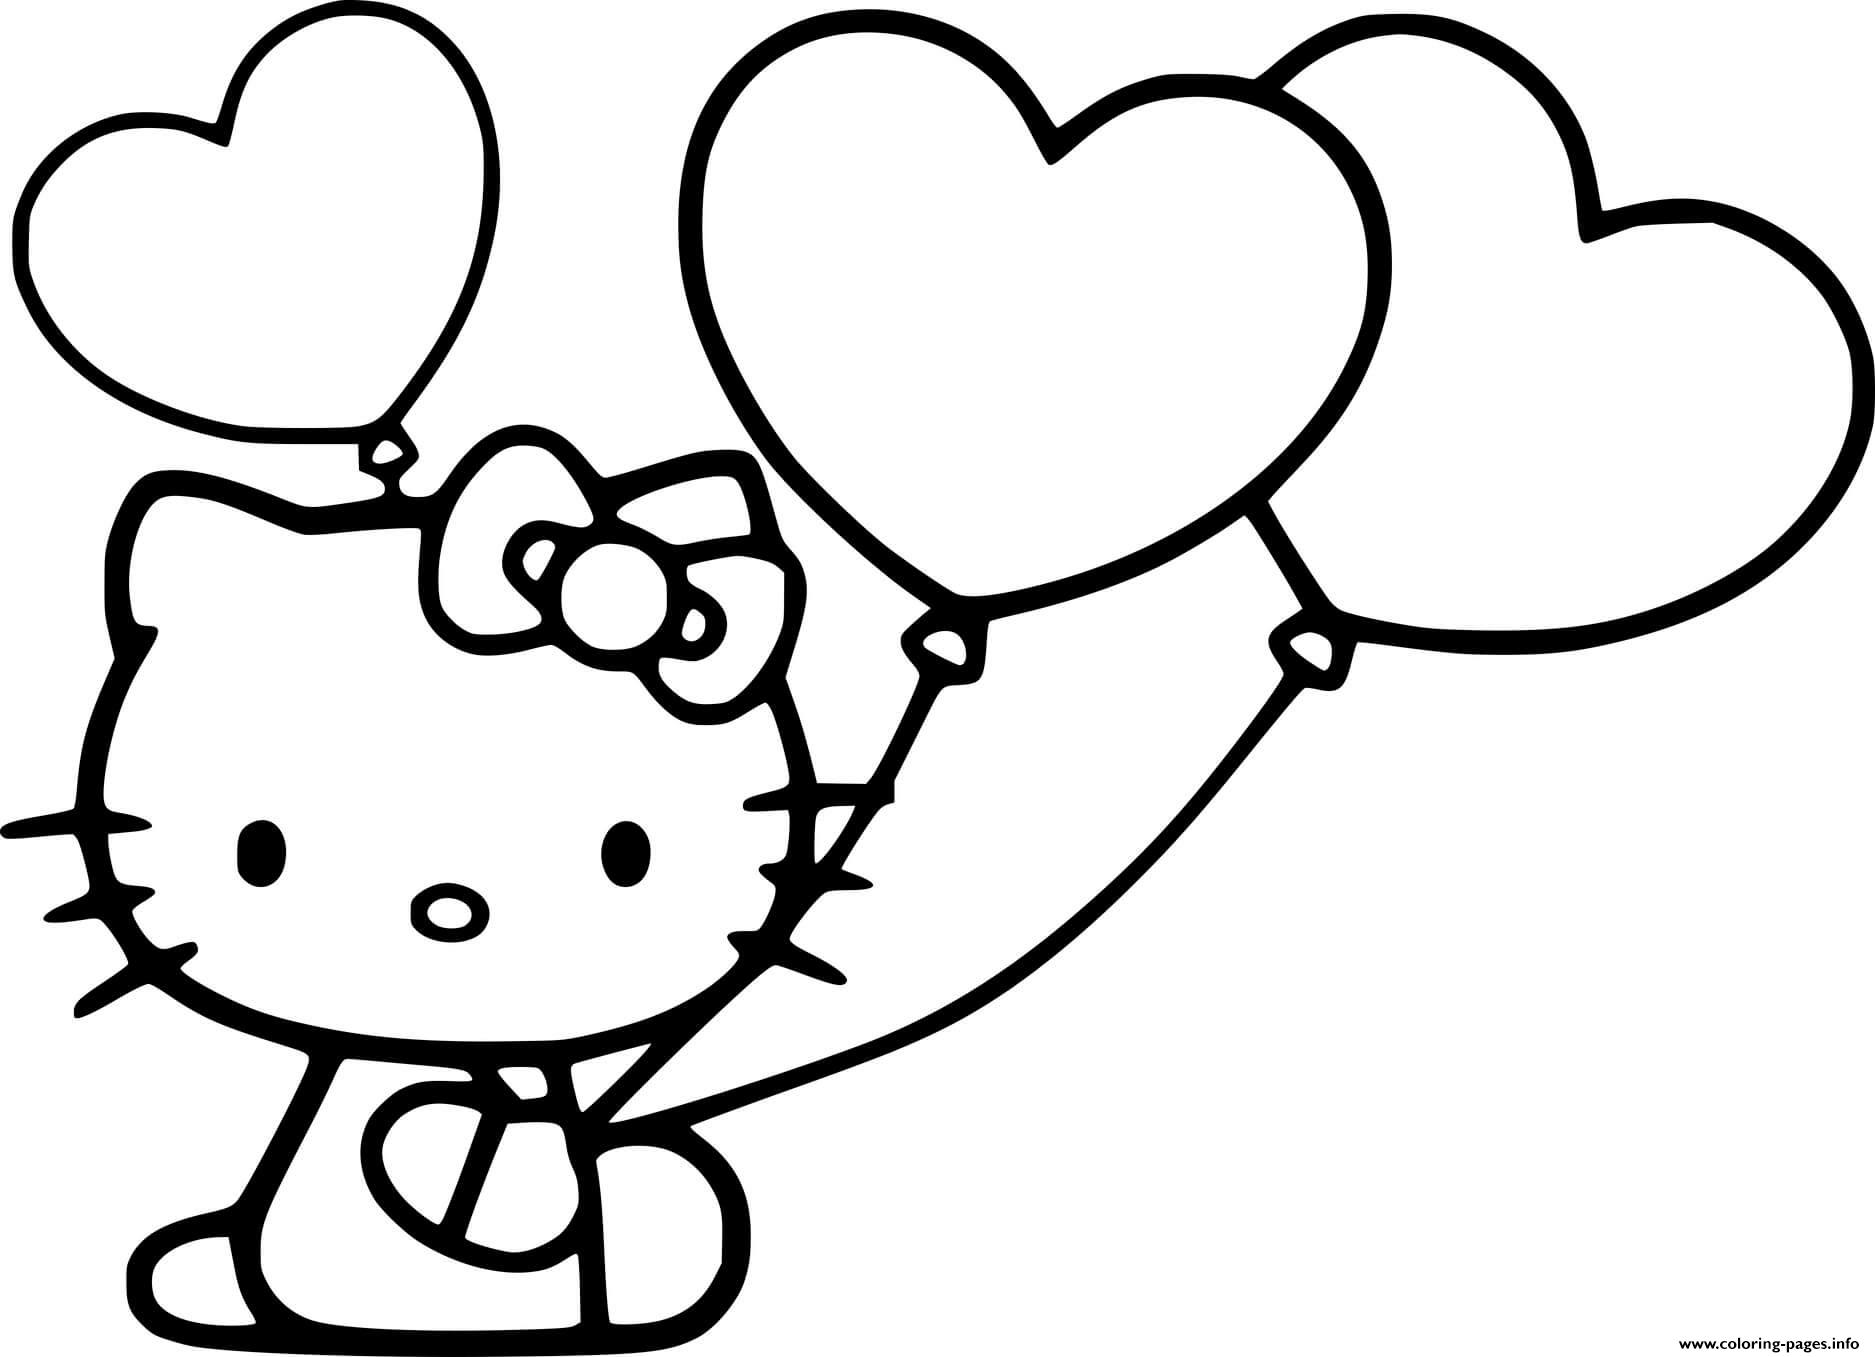 Hello Kitty Holds Heart Balloons coloring